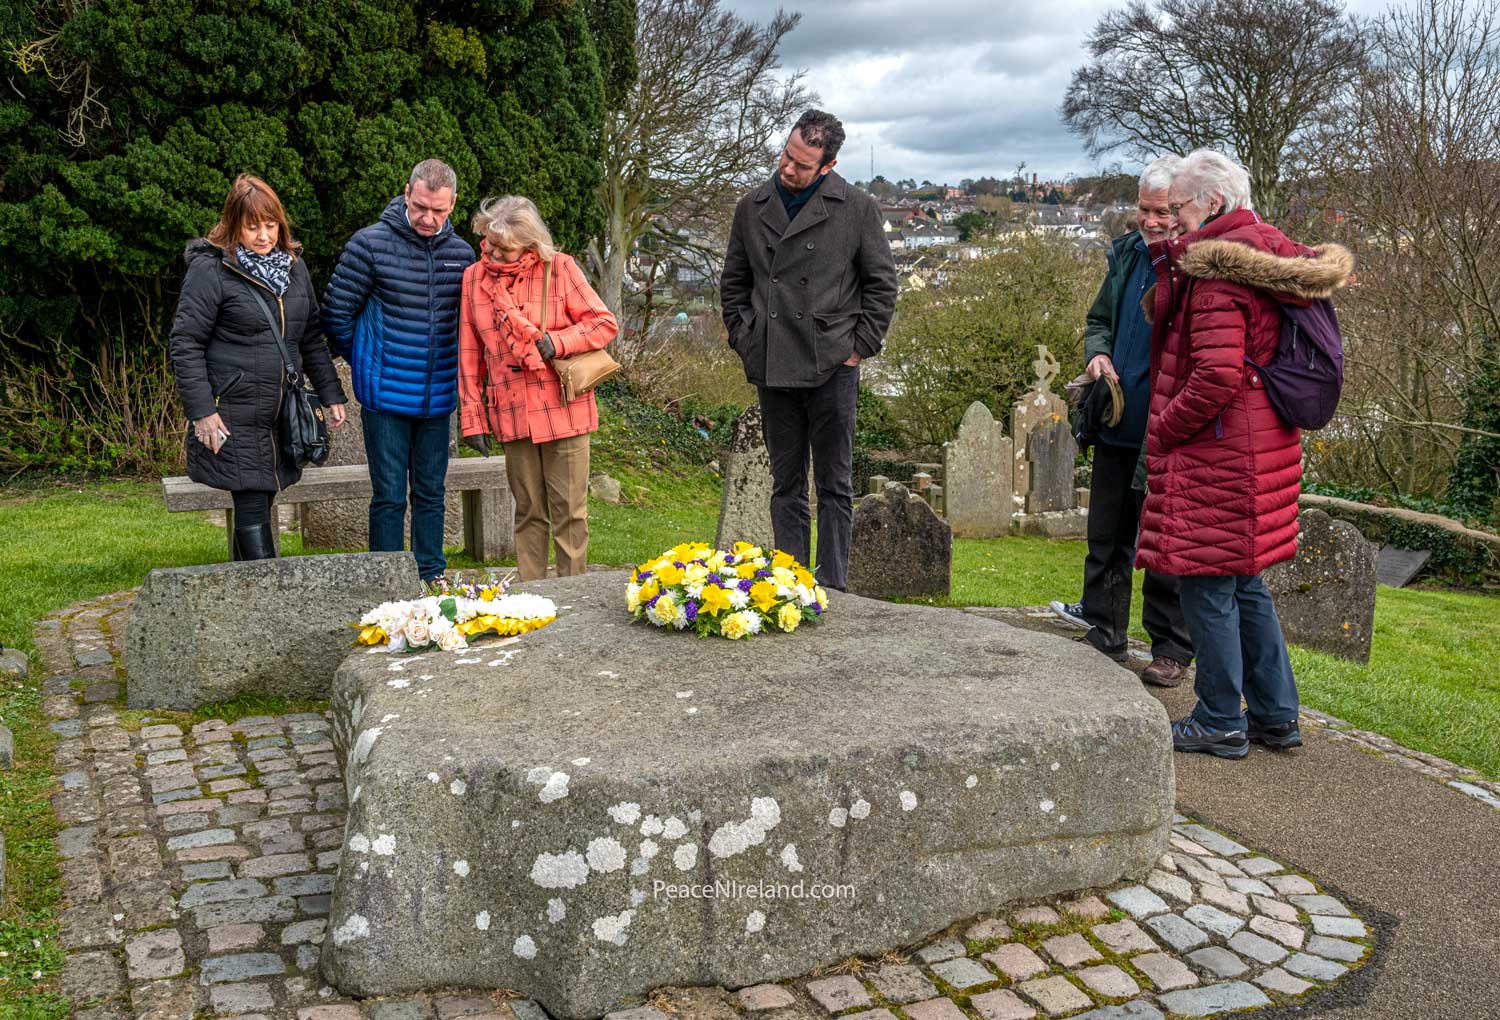 St Patrick's day 2019 - the last year the public could visit his grave before COVID restrictions of 2020 and 2021